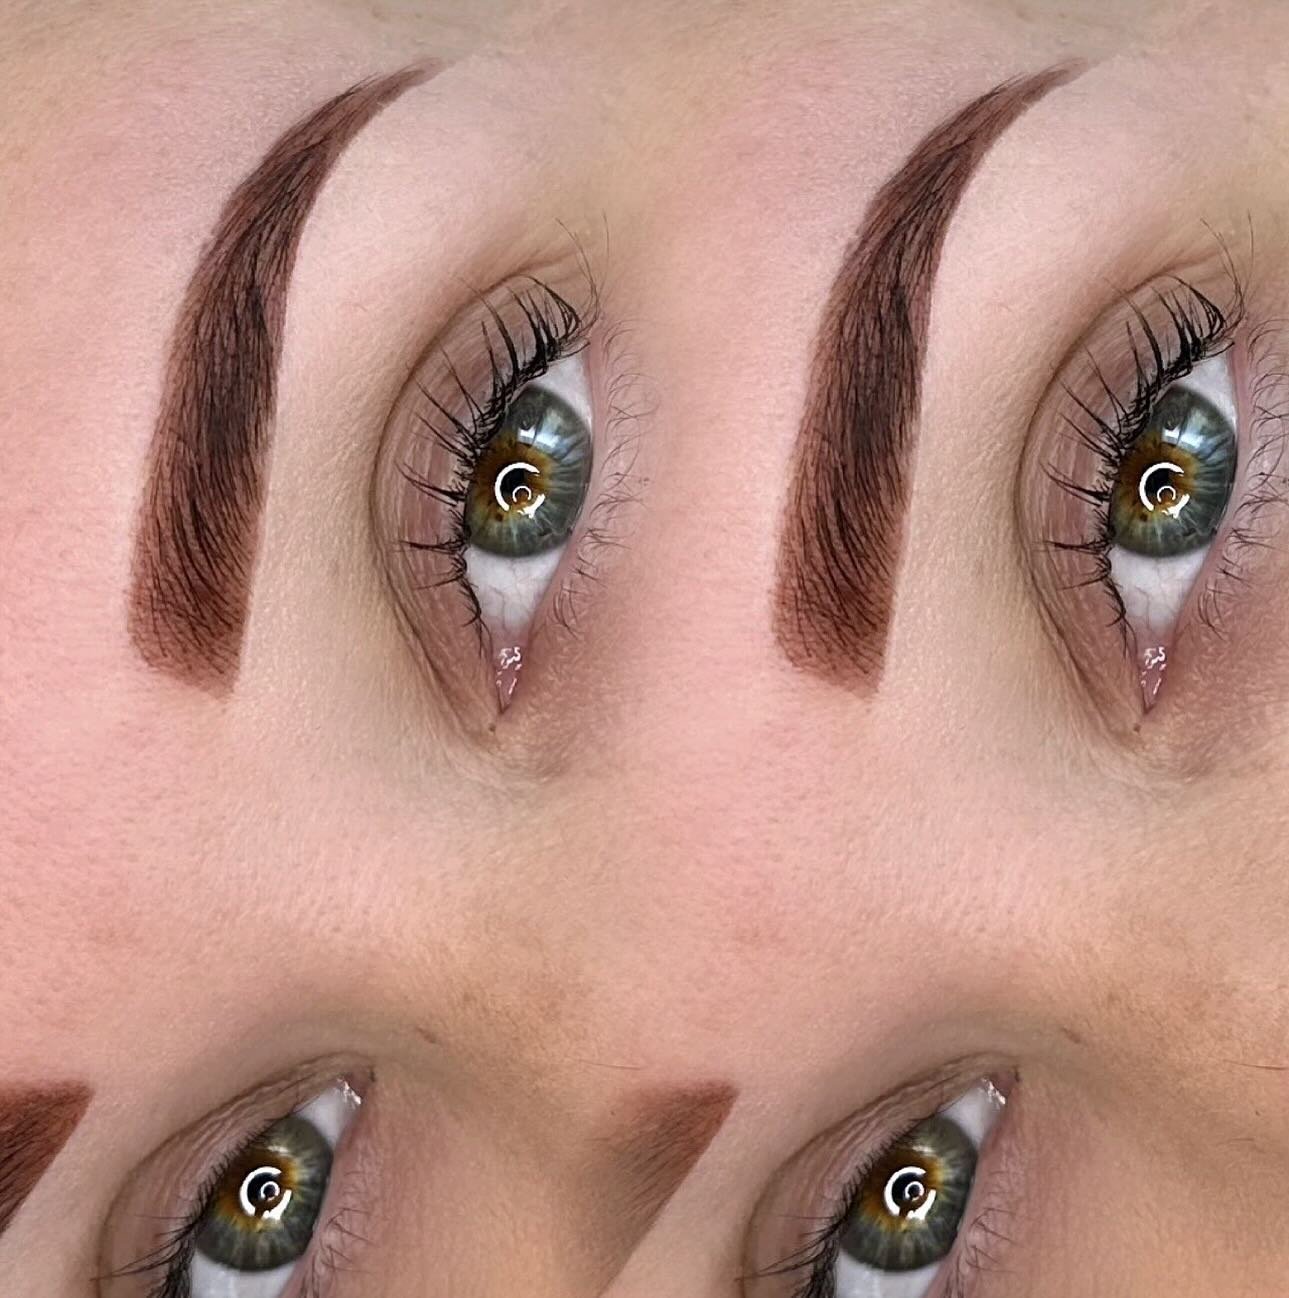 These brows 🥰 I&rsquo;m obsessed 
Who else loves perfect brows 24/7 ??

What is your fav look ? 
✨Feather 
✨Ombr&eacute; 
✨Combination 
✨Powder